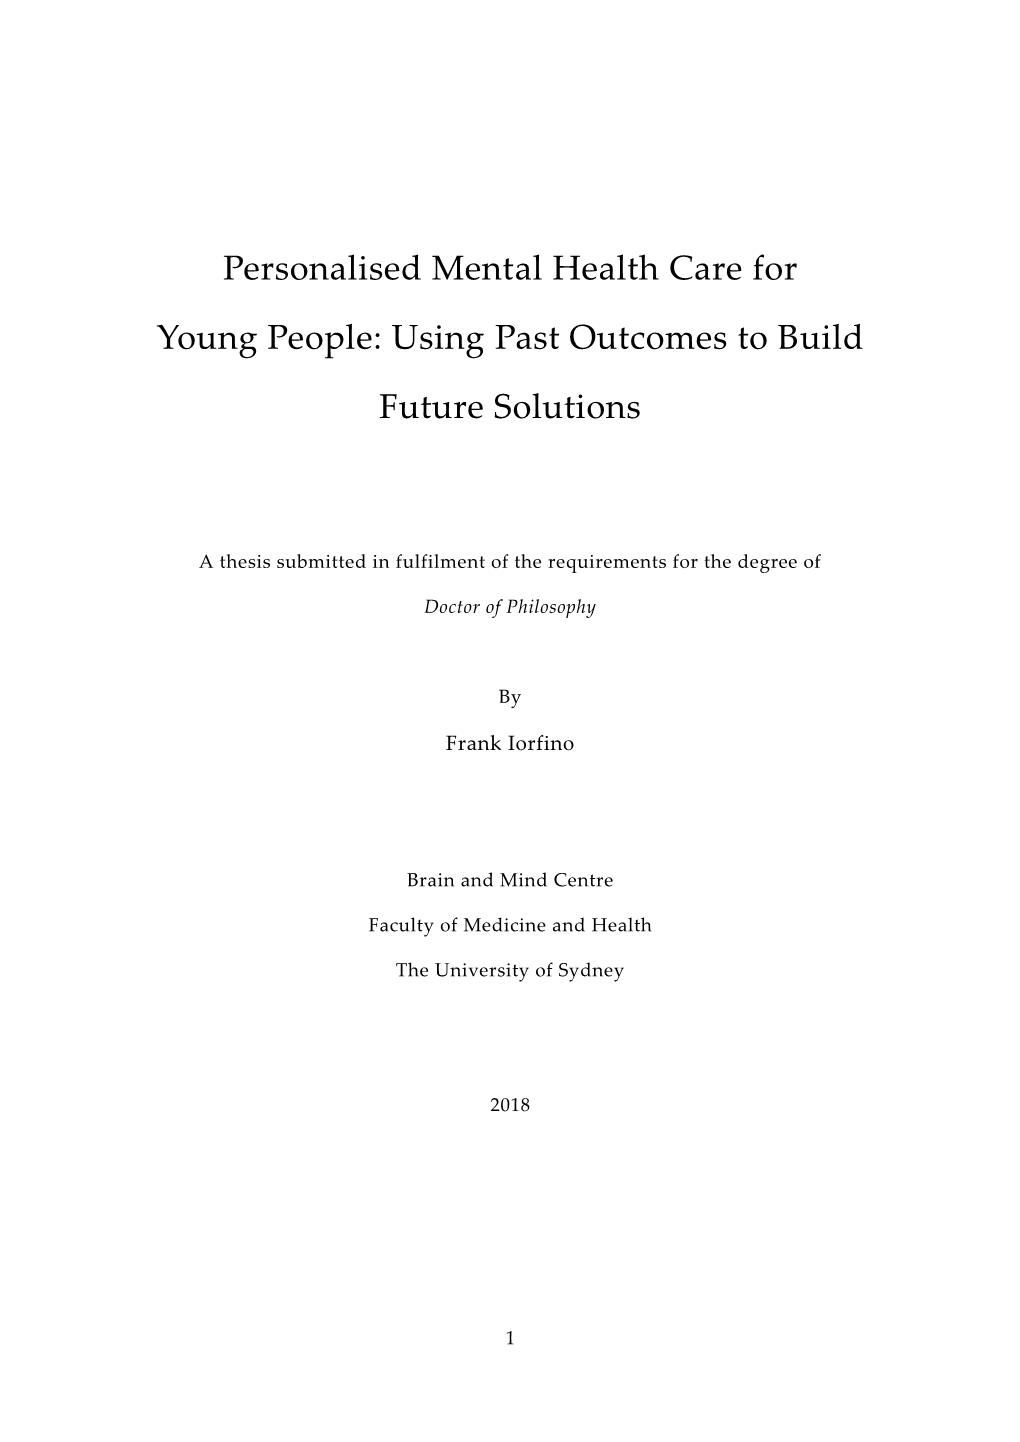 Personalised Mental Health Care for Young People